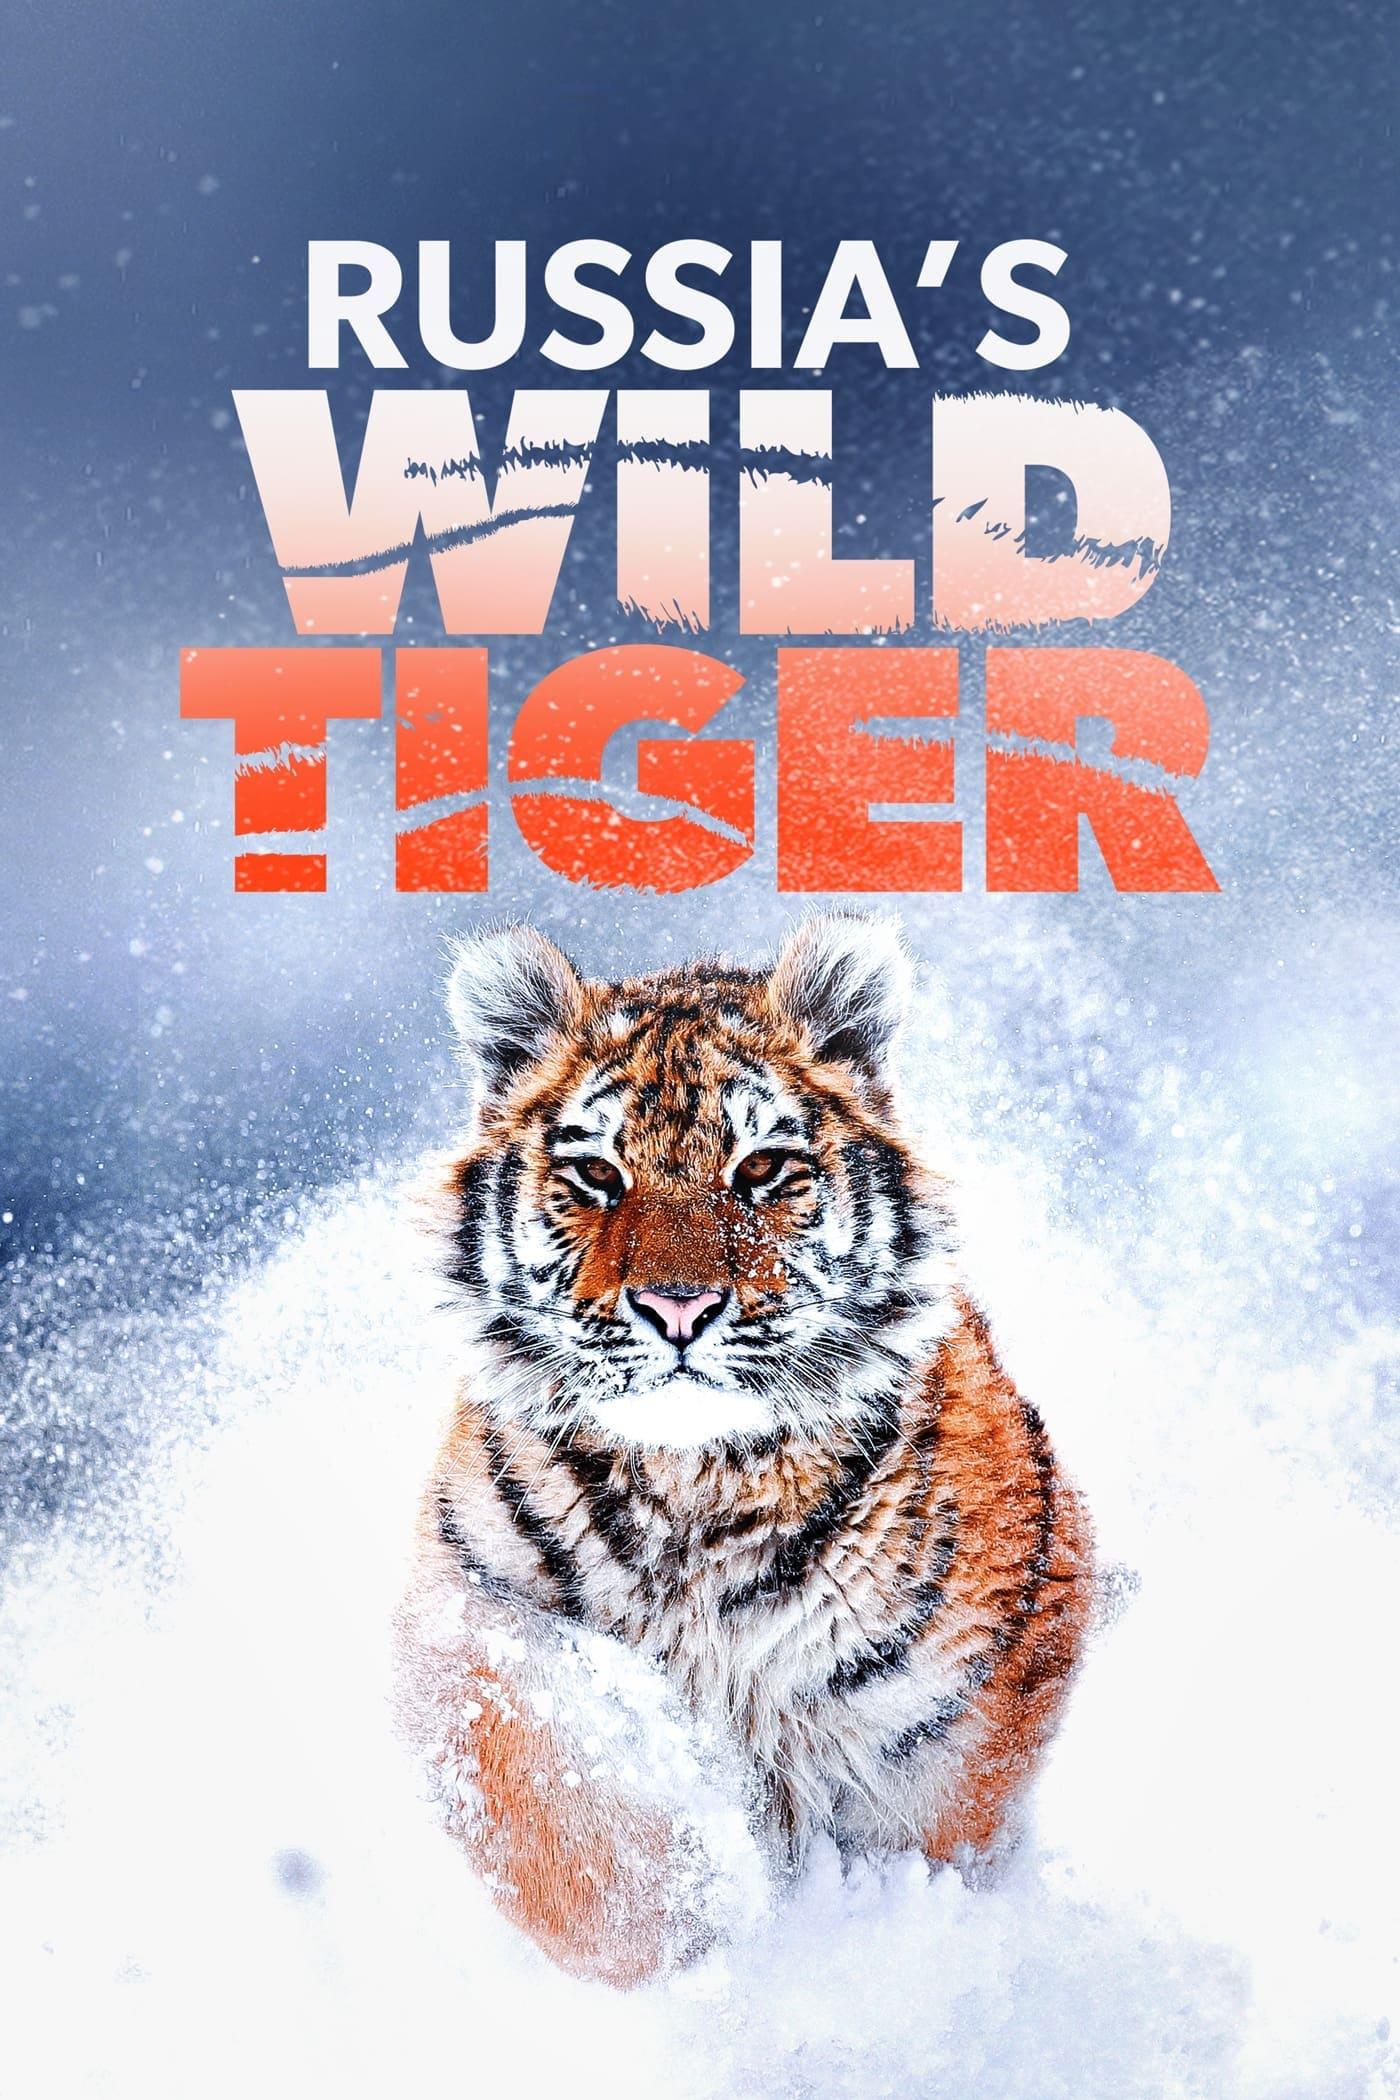 Russia's Wild Tiger poster